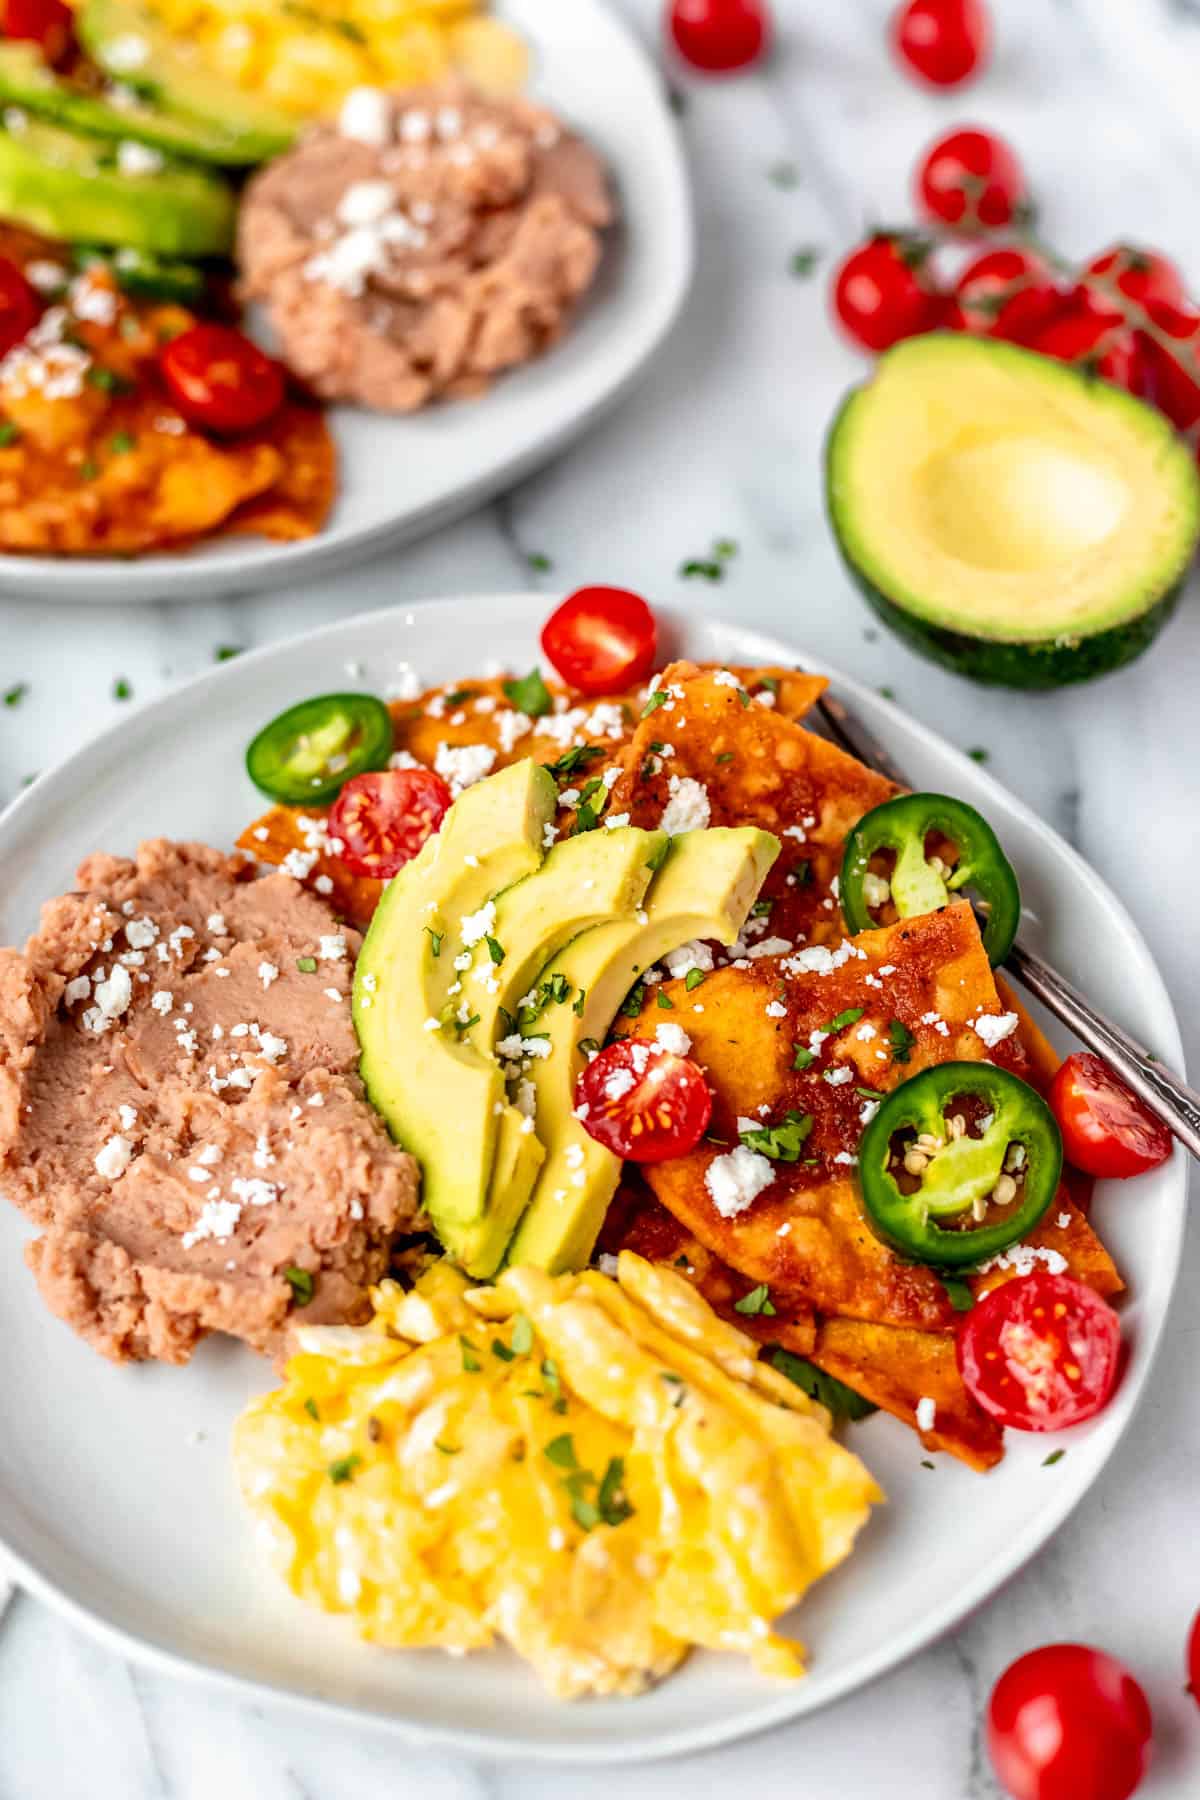 Close up of a plate of chilaquiles rojos topped with slices of jalapeno pepper, tomatoes, and cheese with scrambled egg, refried beans next them and a second plate, avocado, and cherry tomatoes in the background.